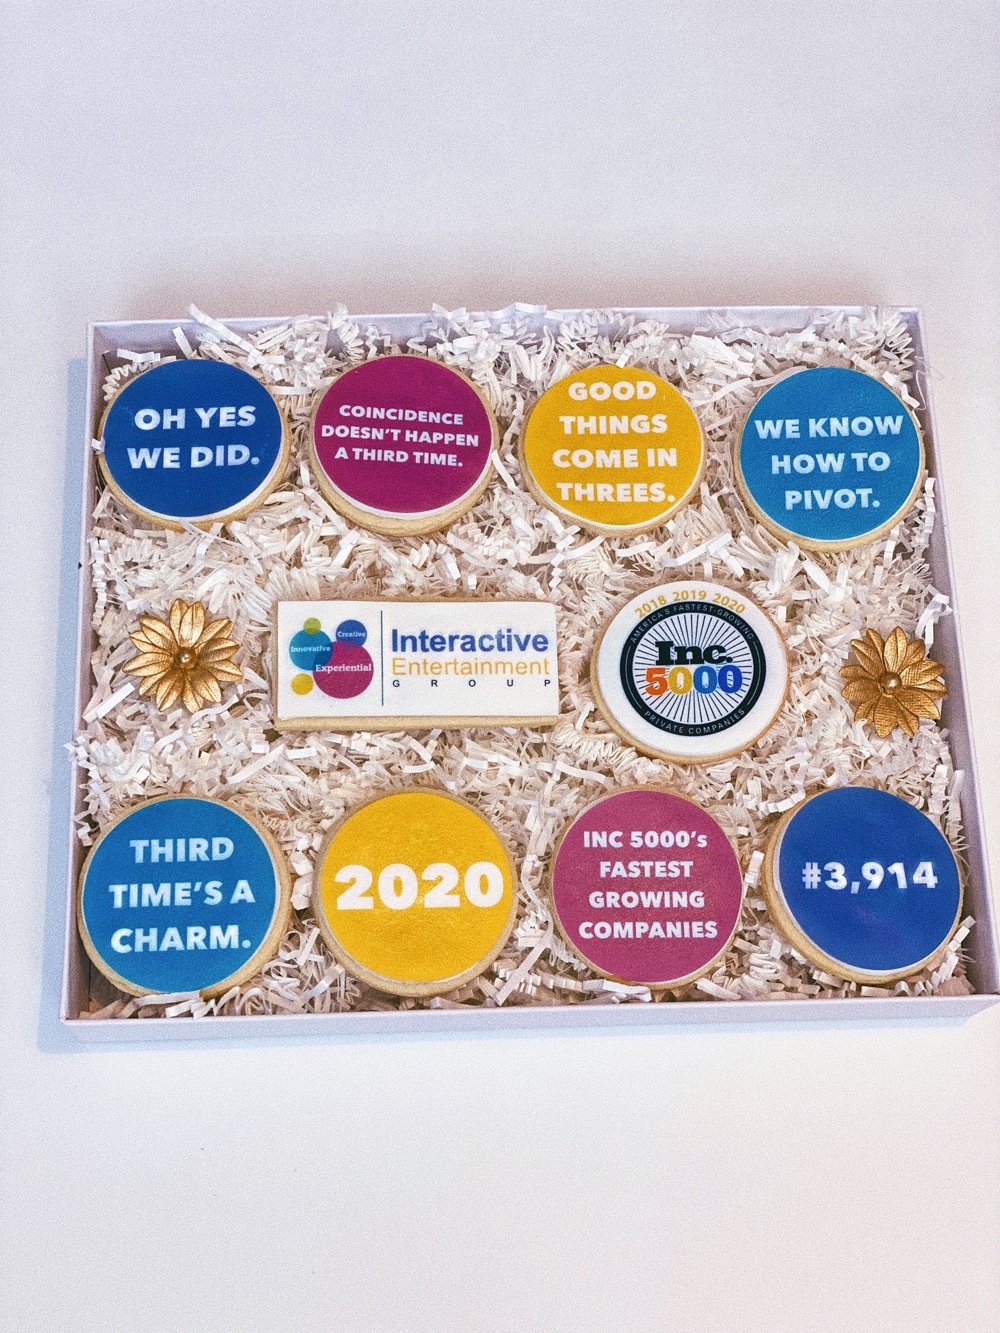 IEG celebrates the honor with cookies that match its aesthetic.